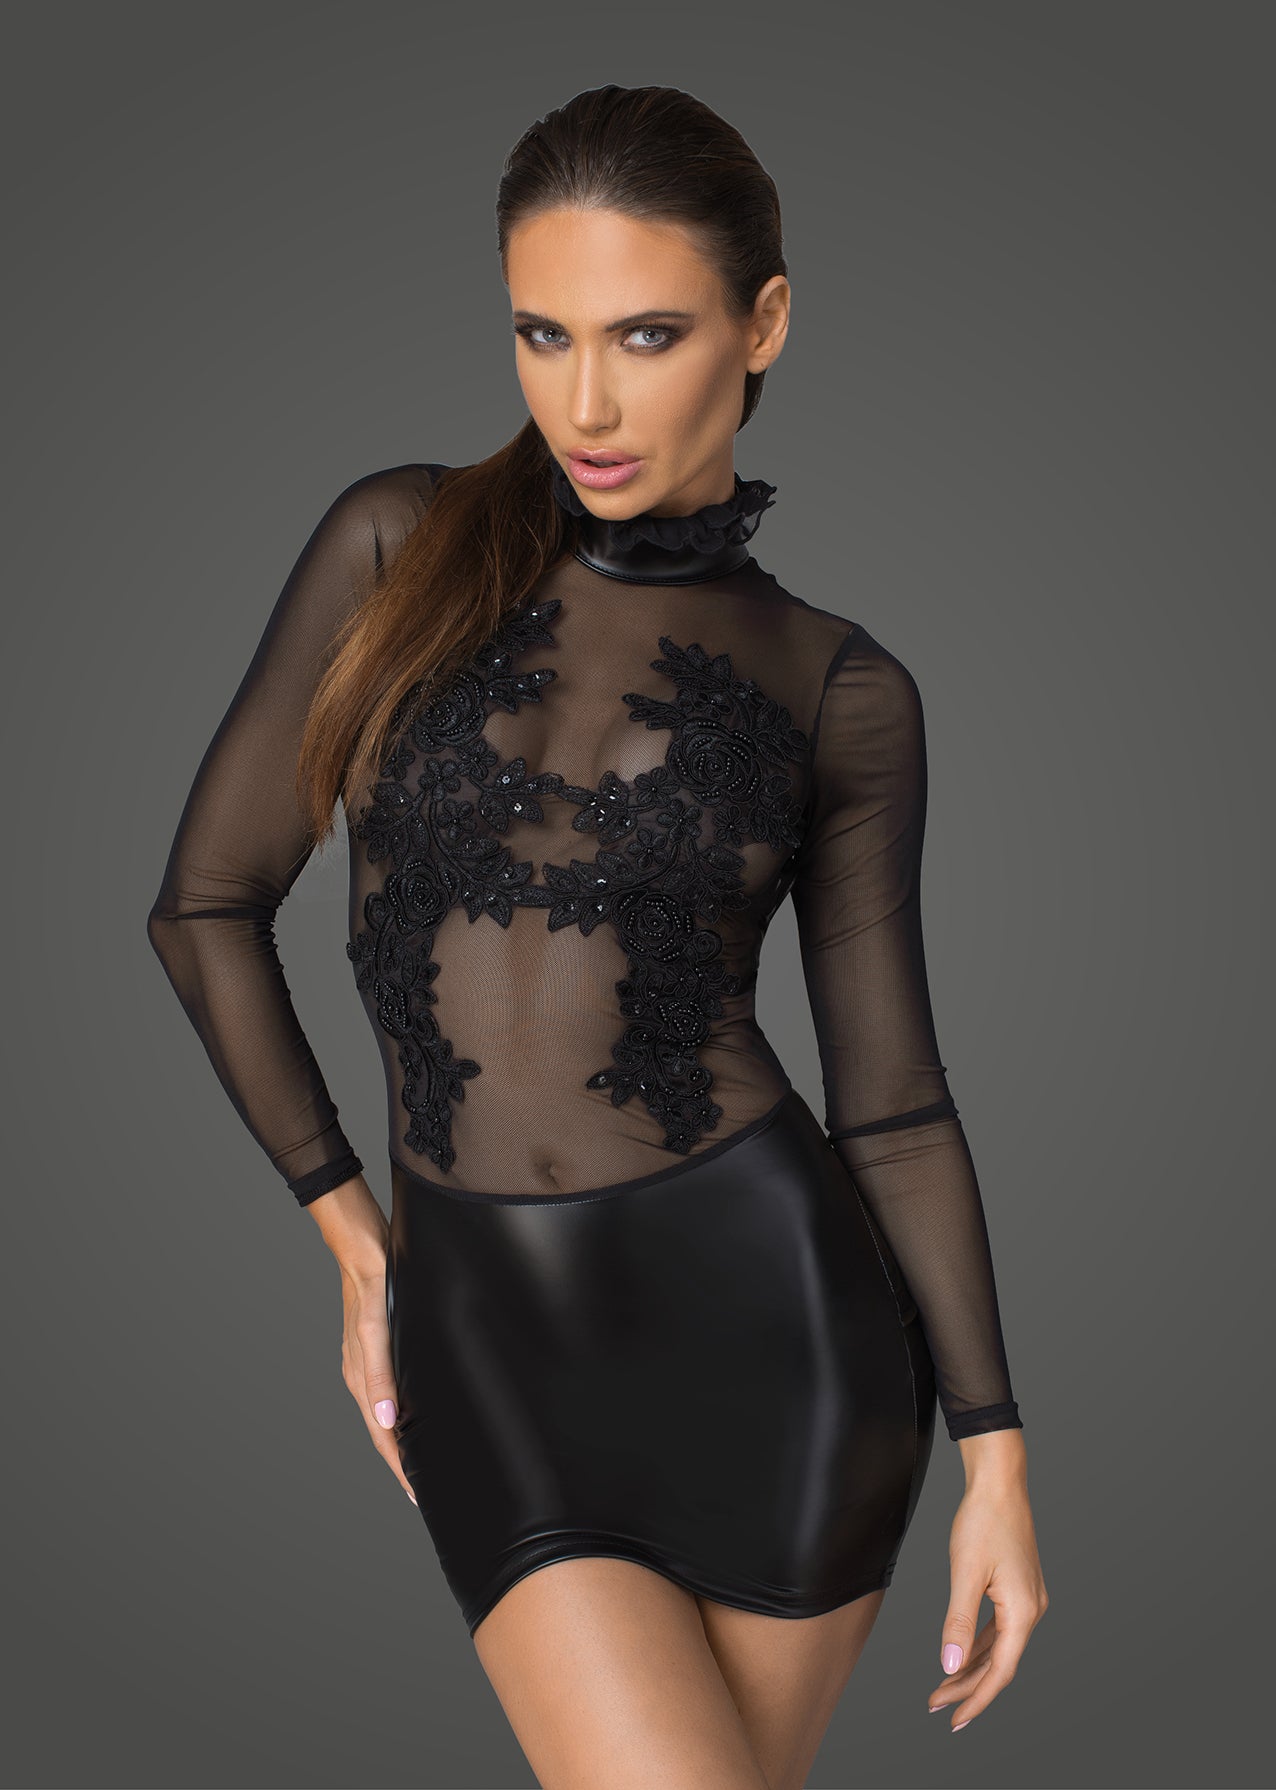 Wetlook dress with mesh and pearls